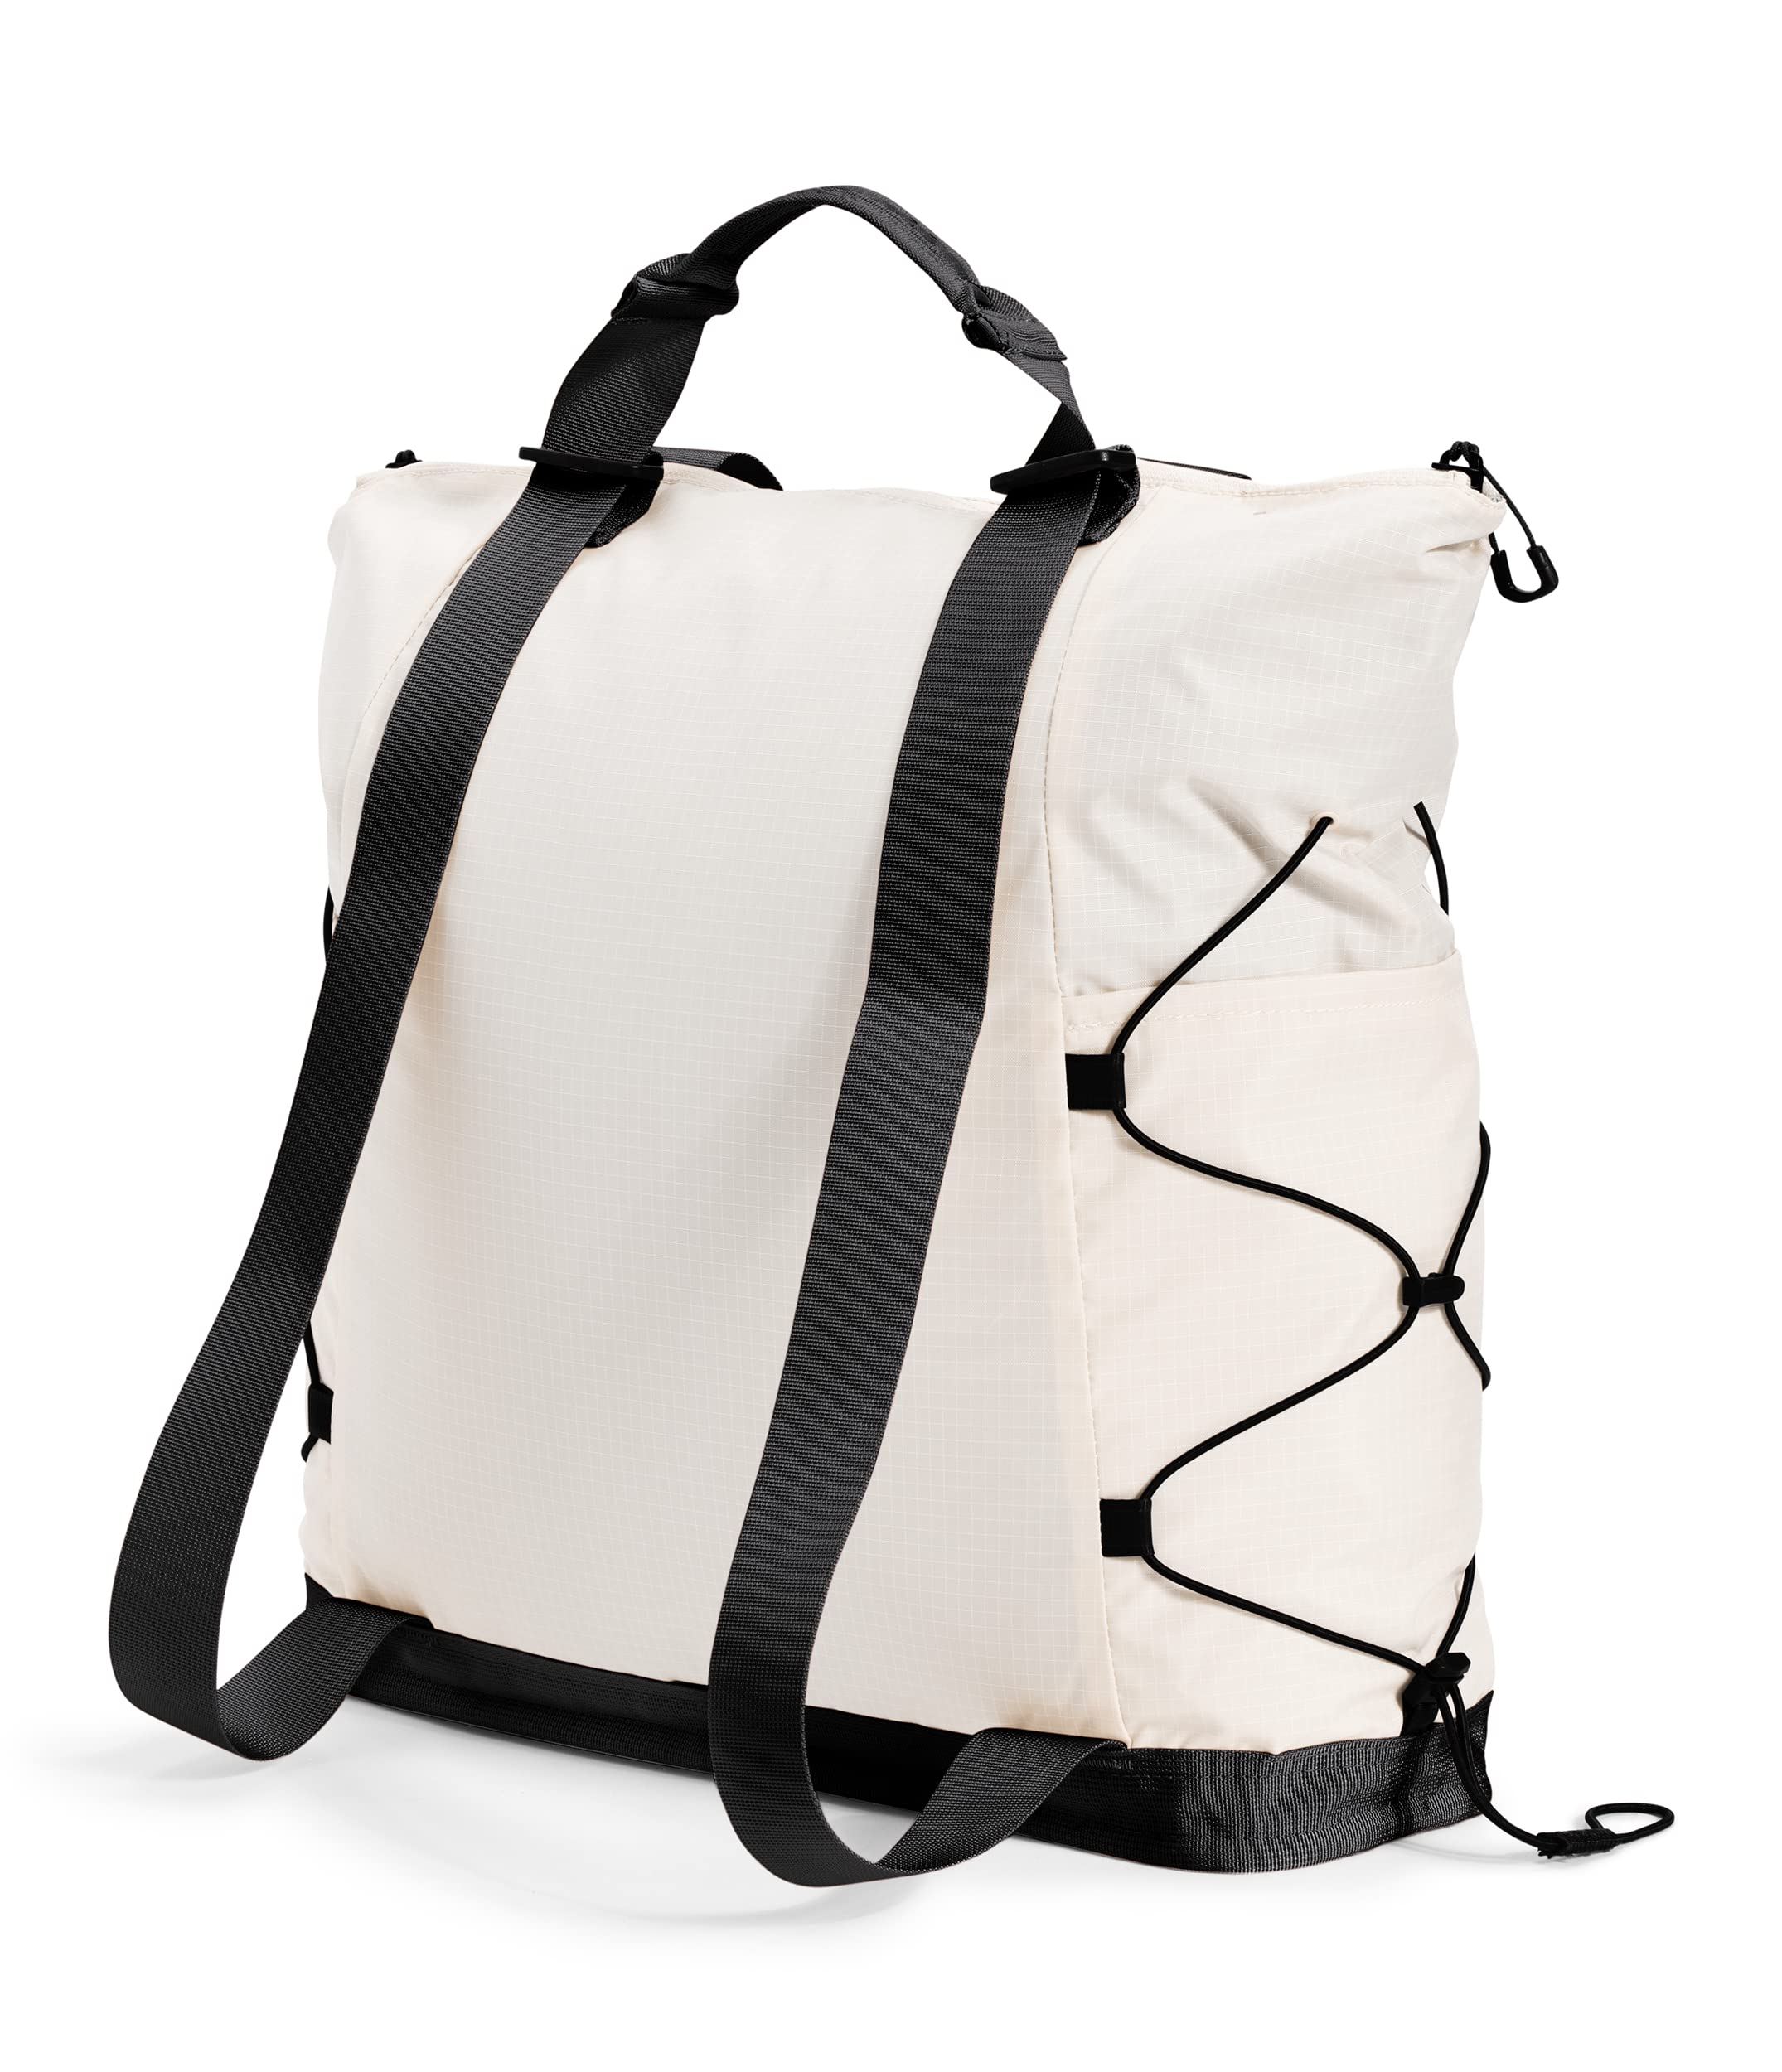 THE NORTH FACE Borealis Laptop Tote Backpack, Gardenia White/TNF Black, One Size